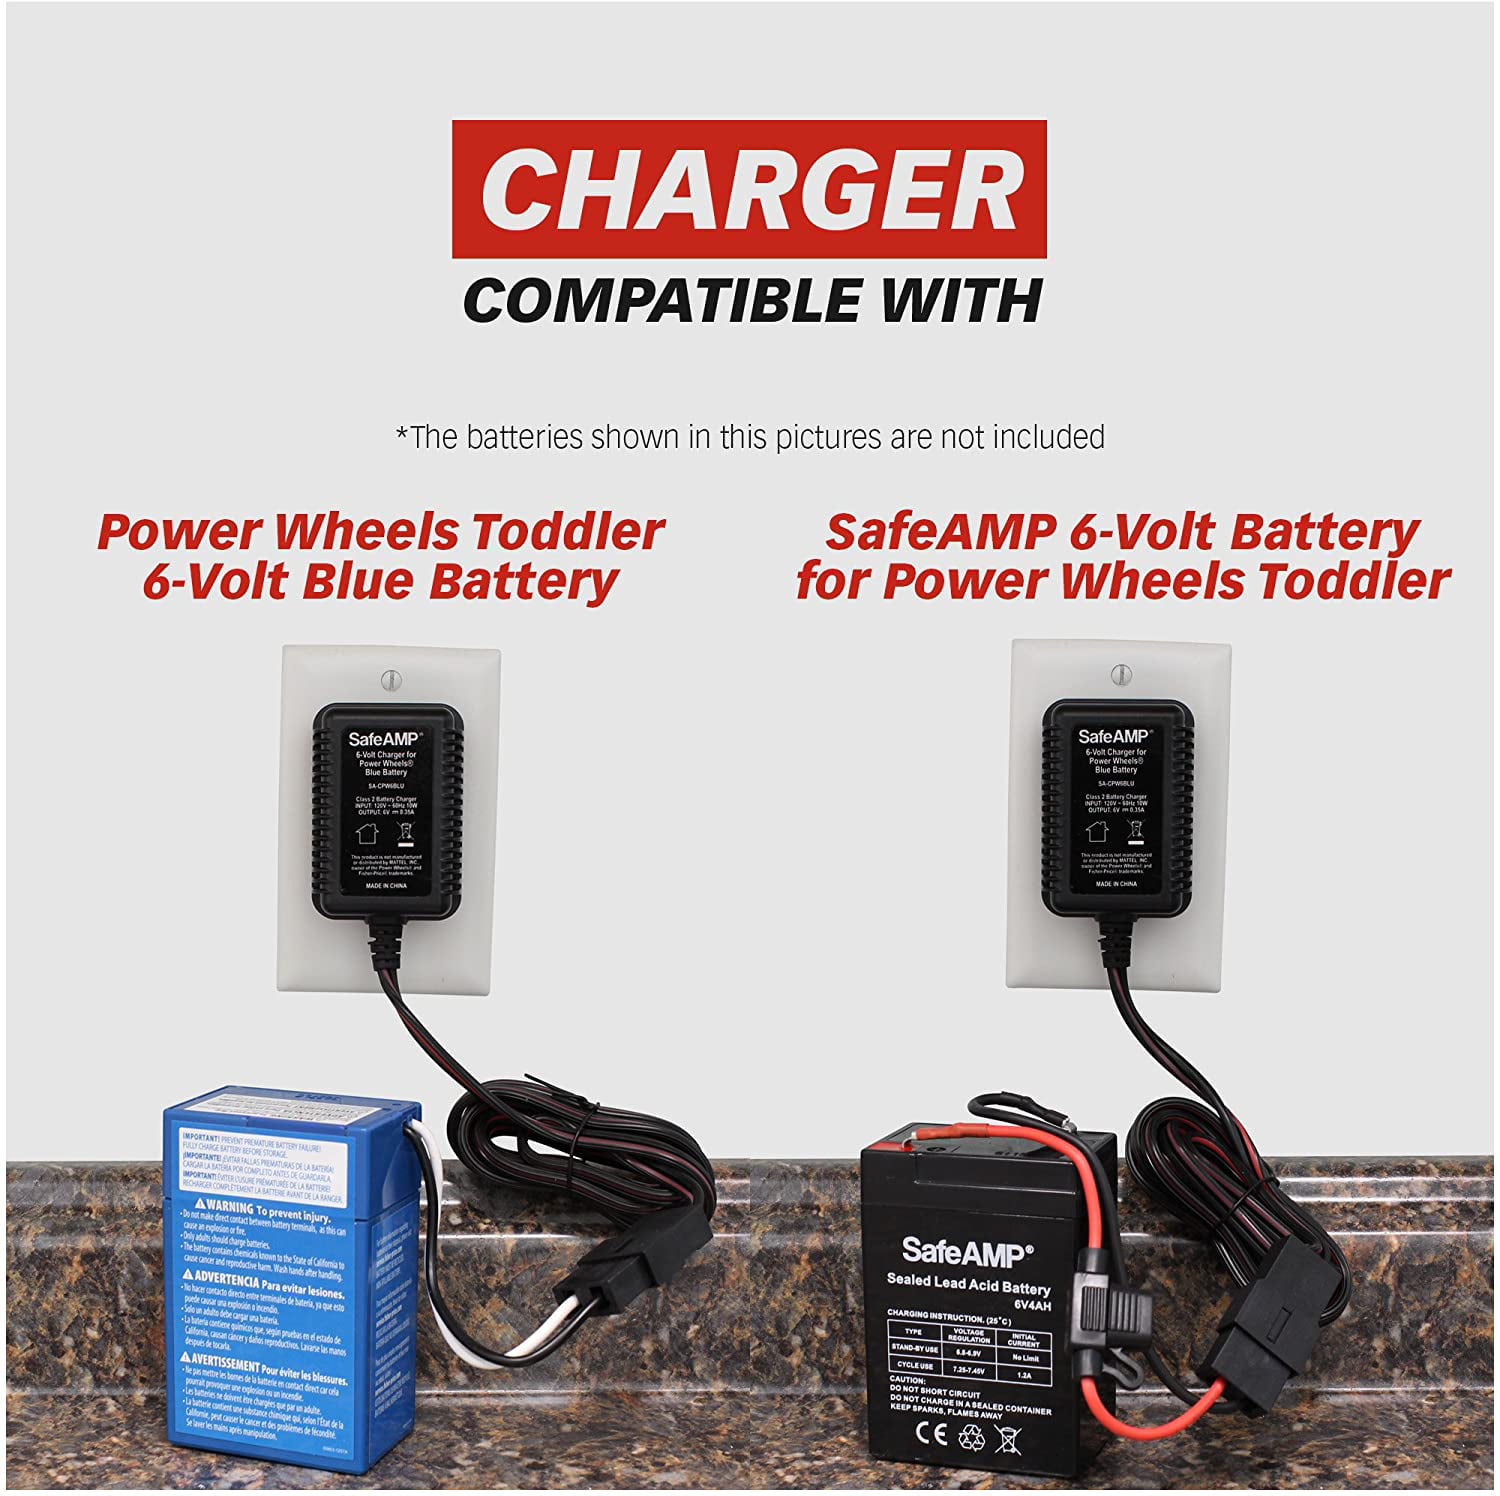 SafeAMP 6-Volt Charger for Fisher-Price Power Wheels Red Battery 